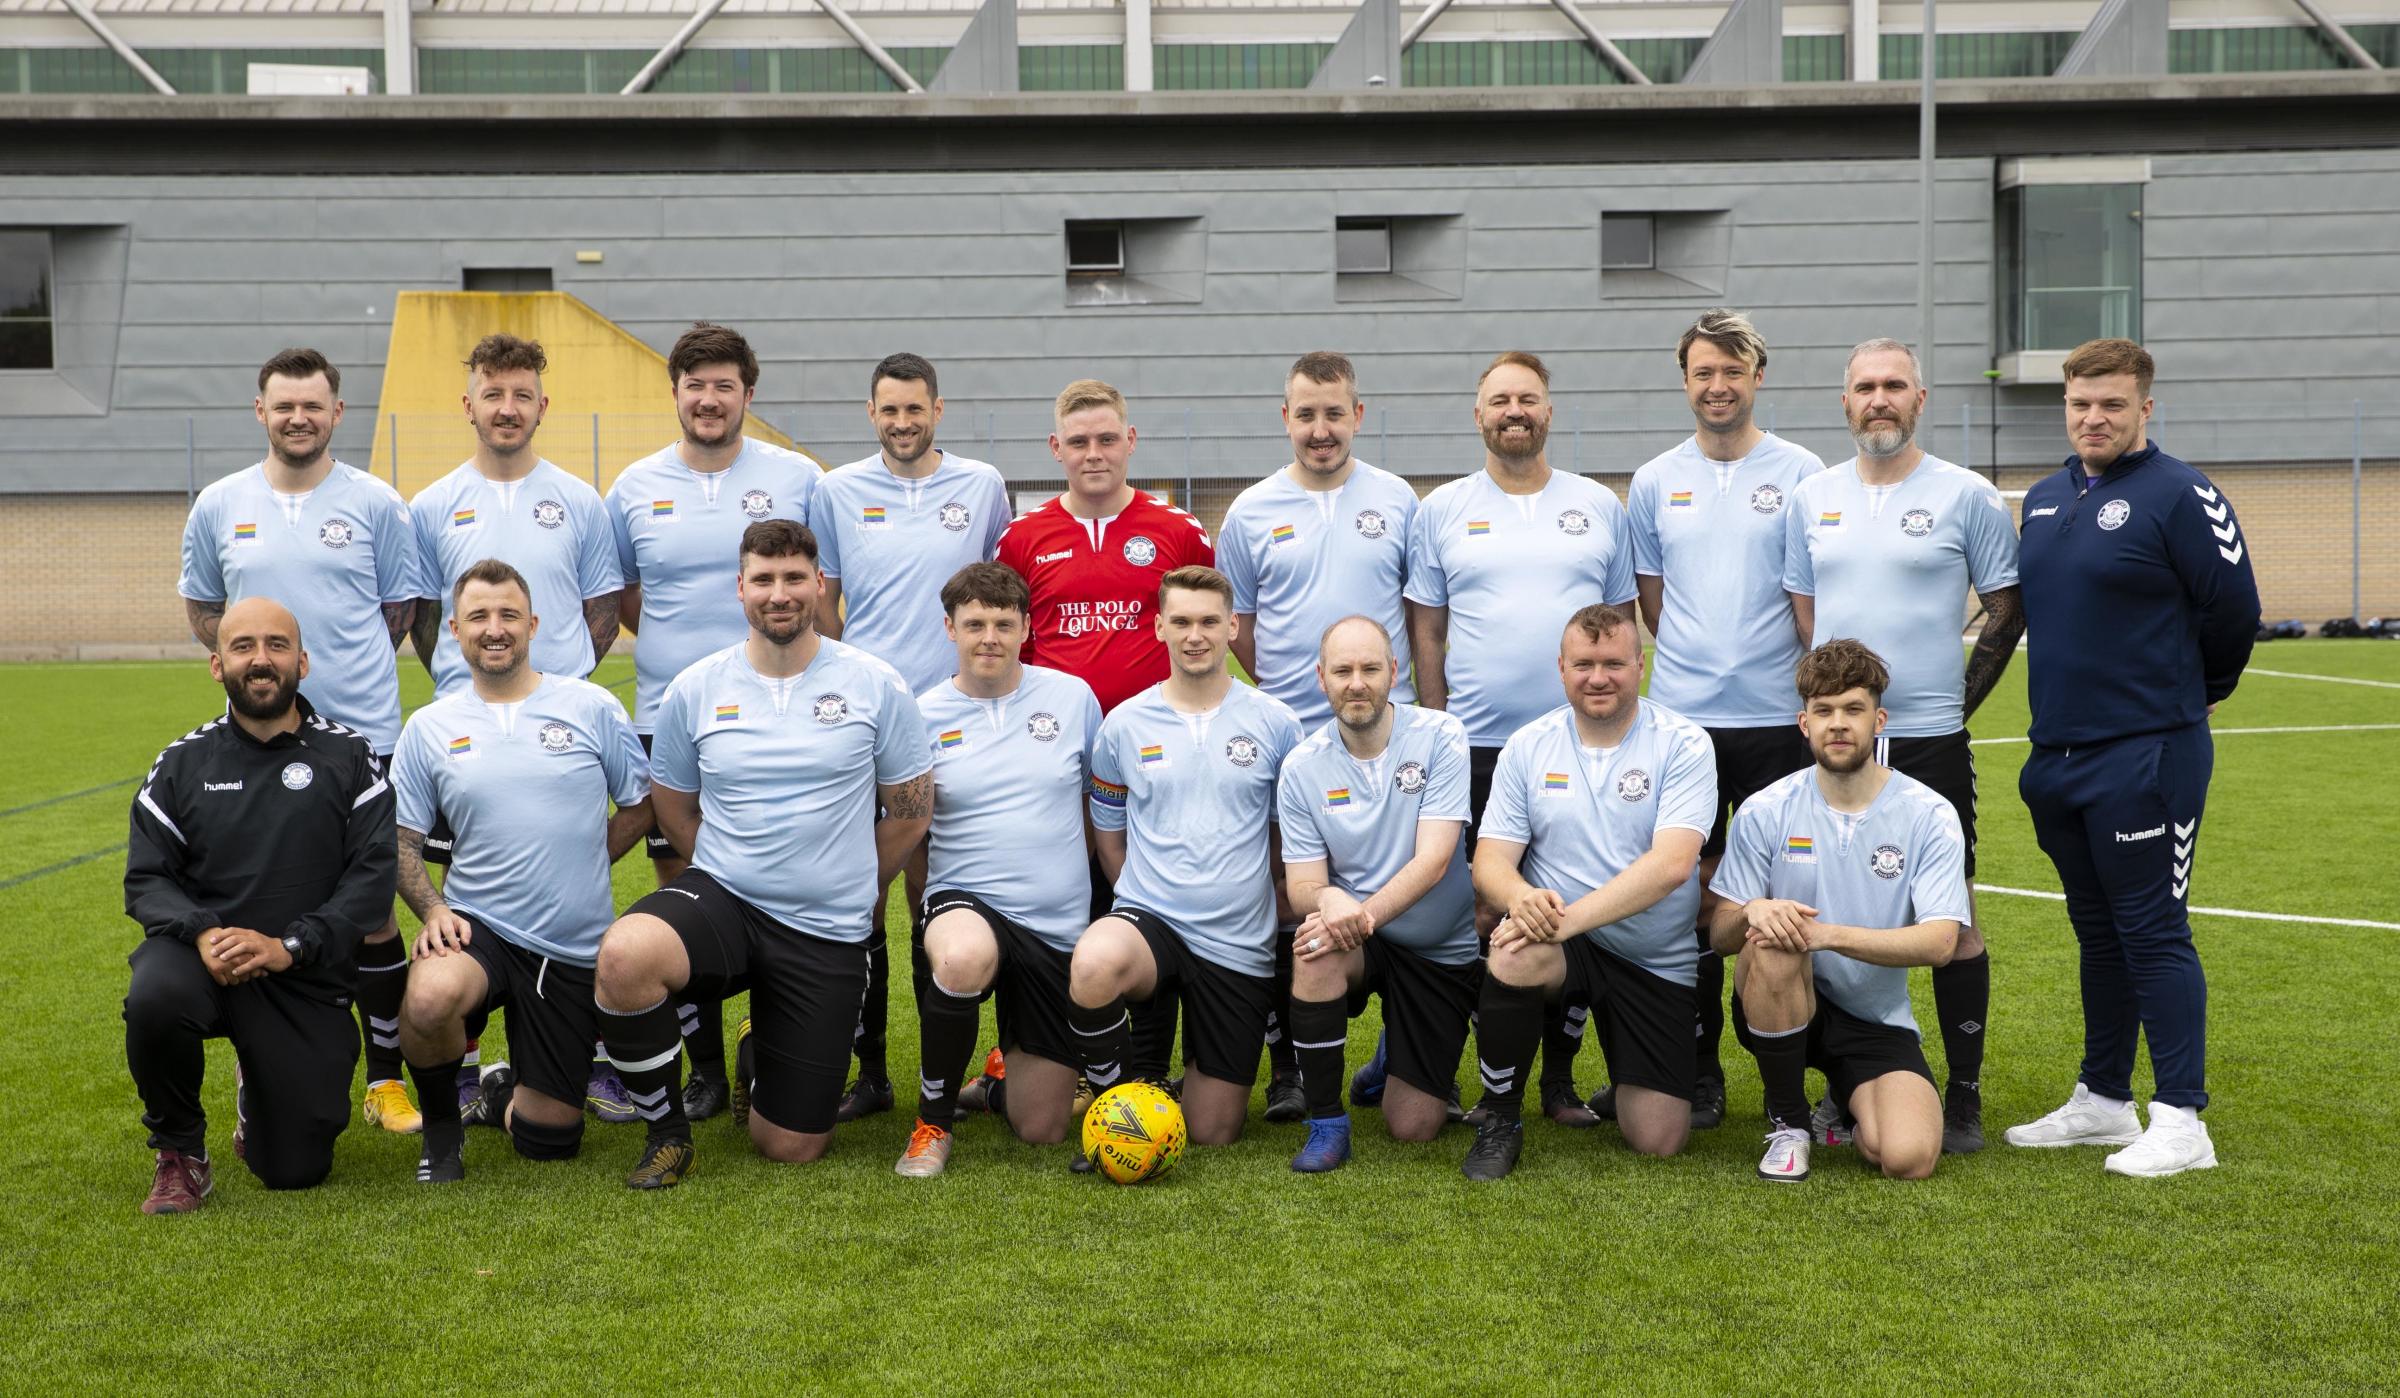 Pride Month 2021: Glasgow team Saltire Thistle FC opens up on inclusivity in football